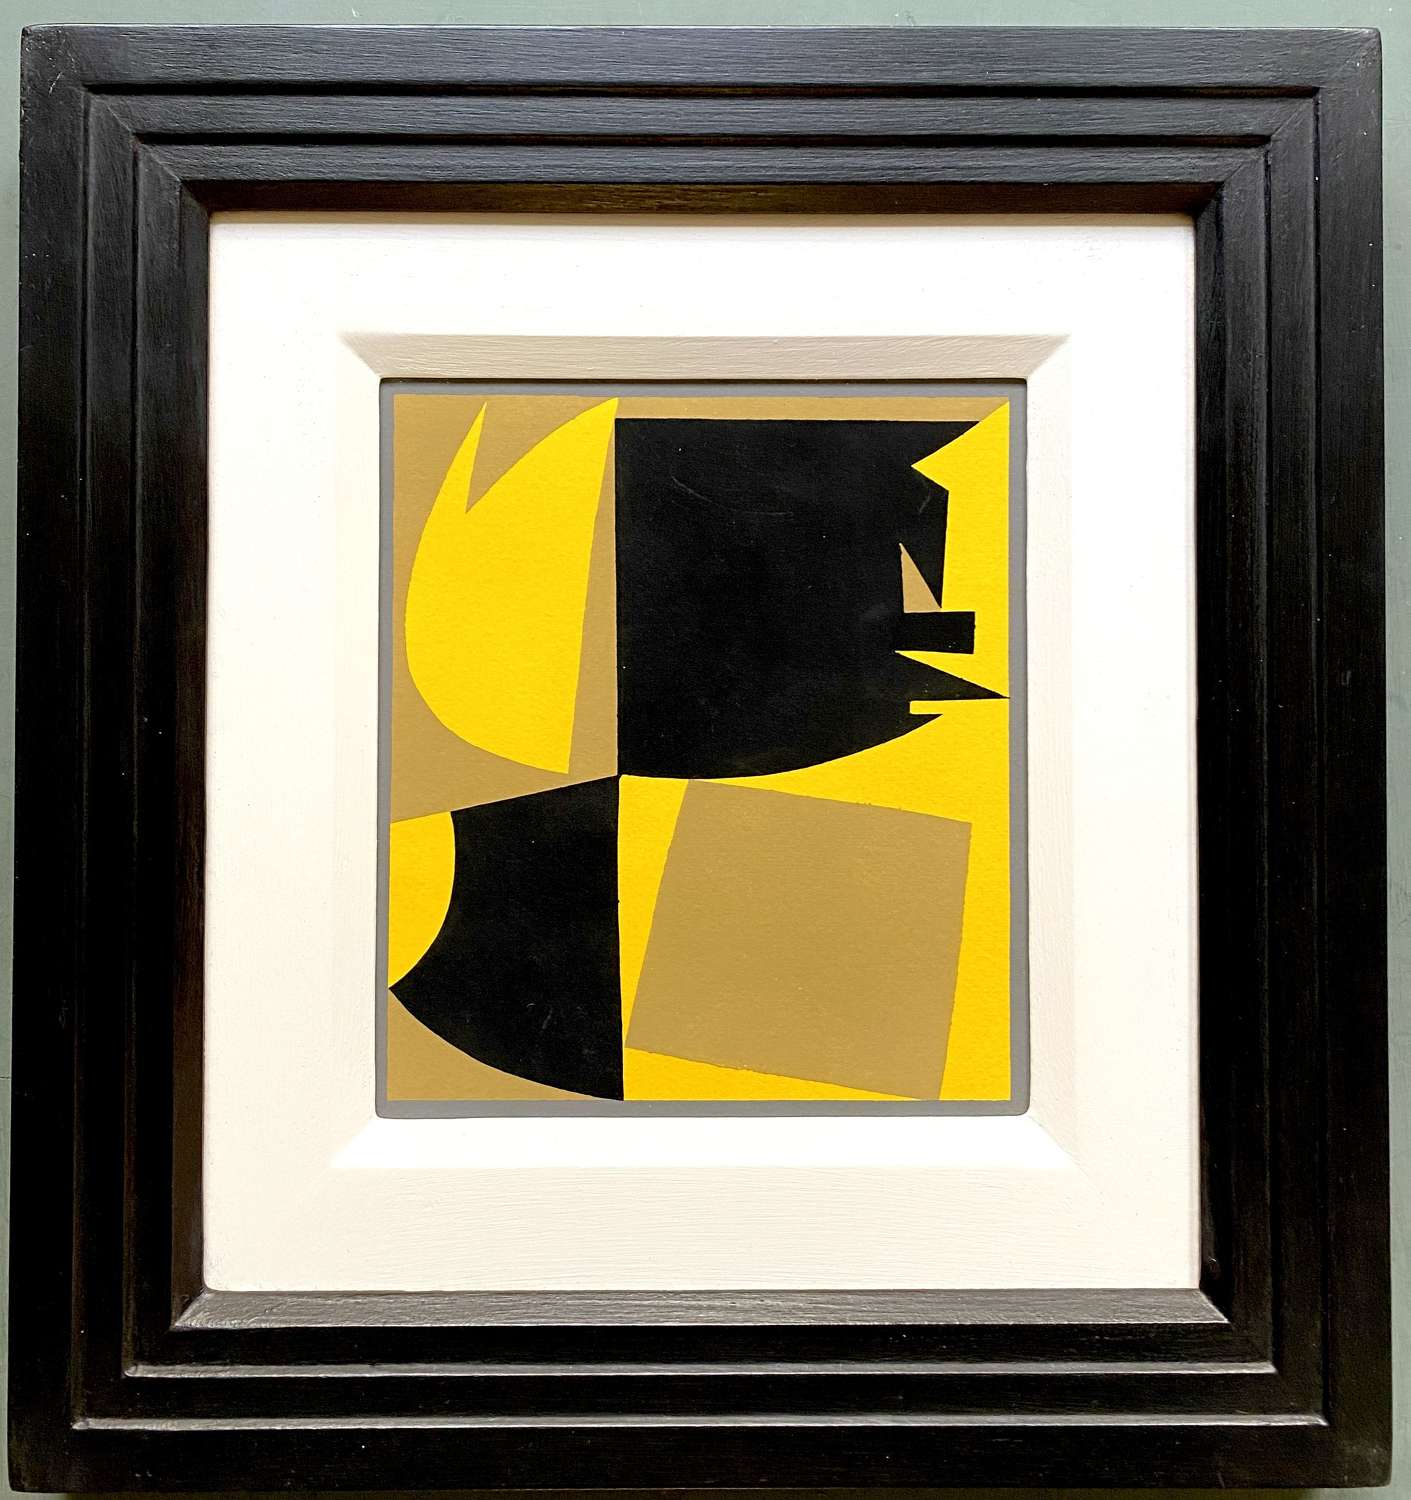 Témoinages II - Victor Vasarely